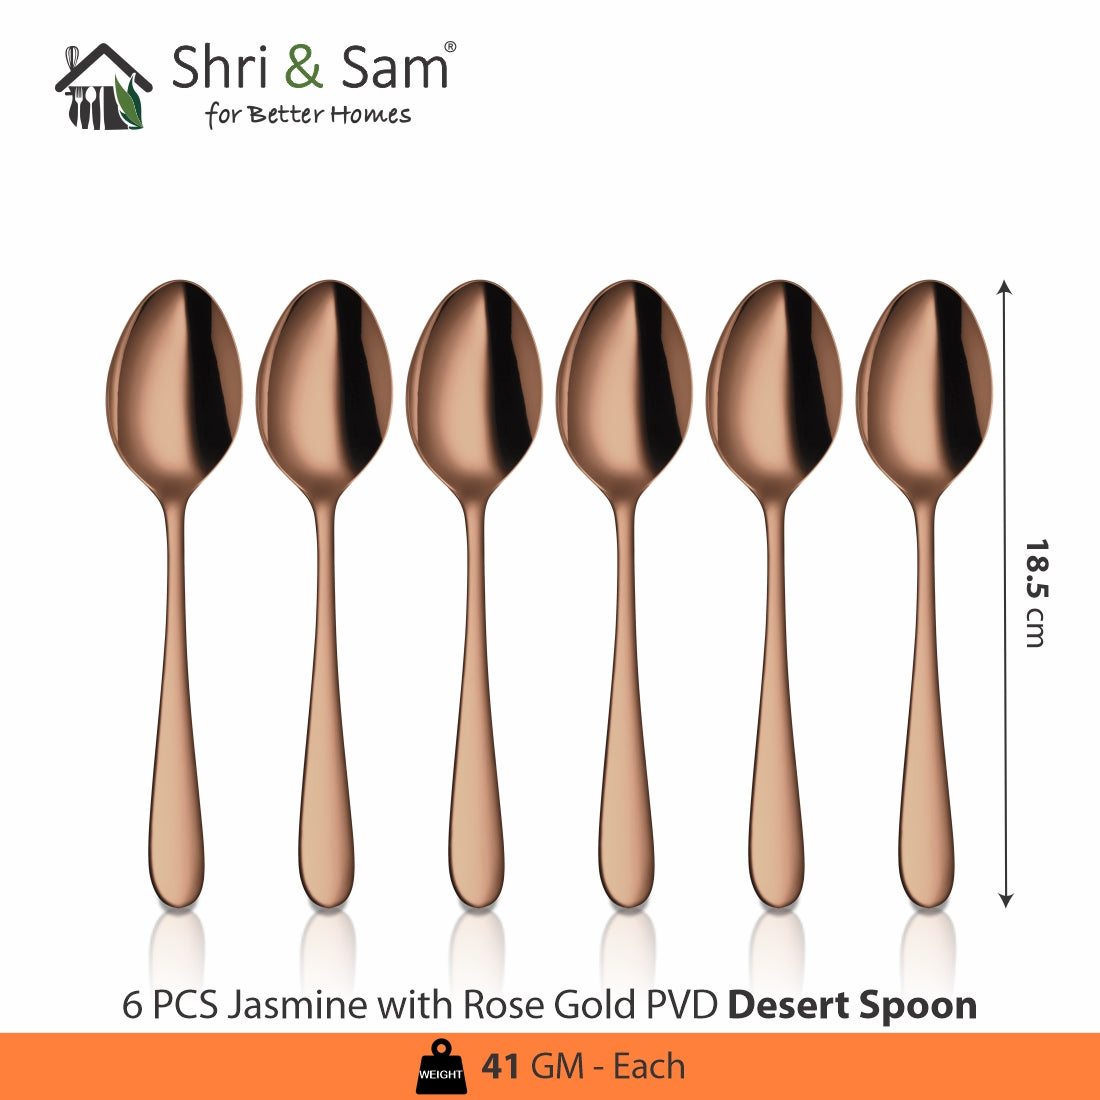 Stainless Steel Cutlery with Rose Gold PVD Coating Jasmine